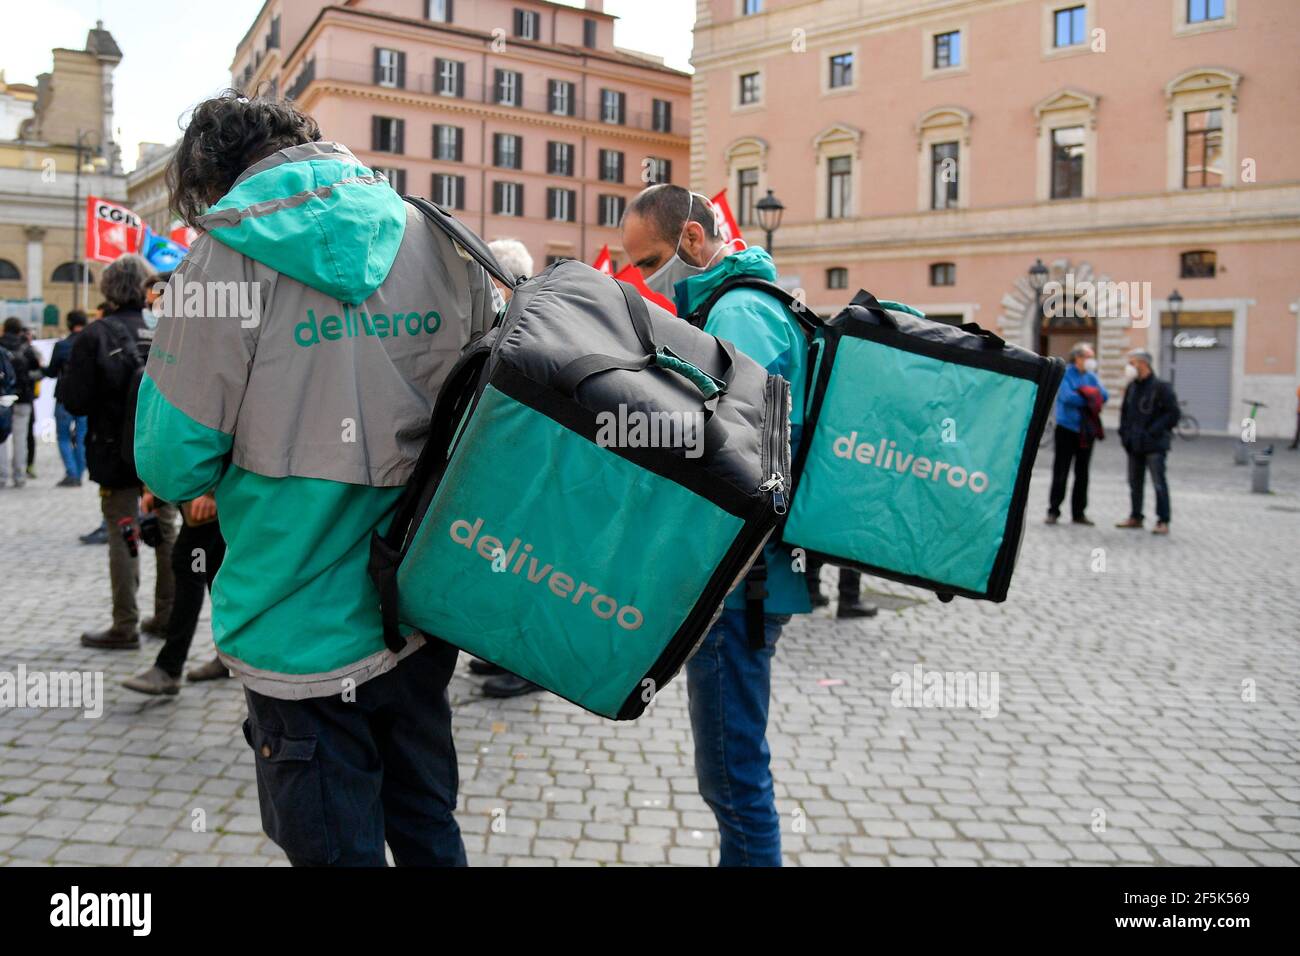 Roma, Italy. 26th Mar, 2021. Delivery men from Deliveroo seen during the demonstration.Delivery riders protest in a ‘No delivery day Rider demonstration' at Piazza San Silvestro Rome asking for real contracts with better protection, concrete guarantees, fairness and respect for their work with adequate remuneration. (Photo by Fabrizio Corradetti/SOPA Image/Sipa USA) Credit: Sipa USA/Alamy Live News Stock Photo